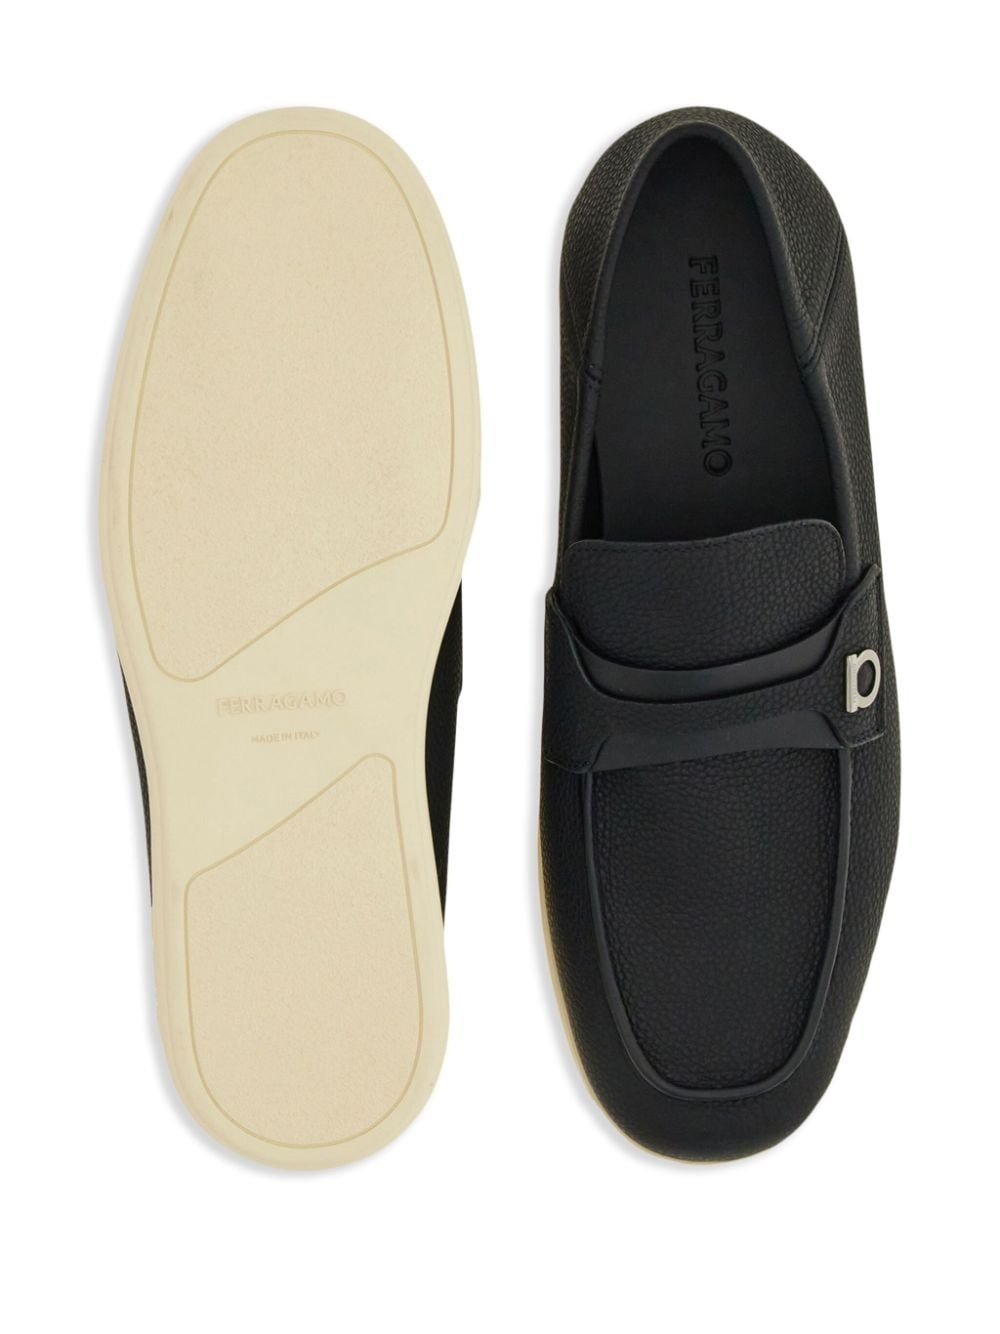 Gancini-plaque leather loafers - 5